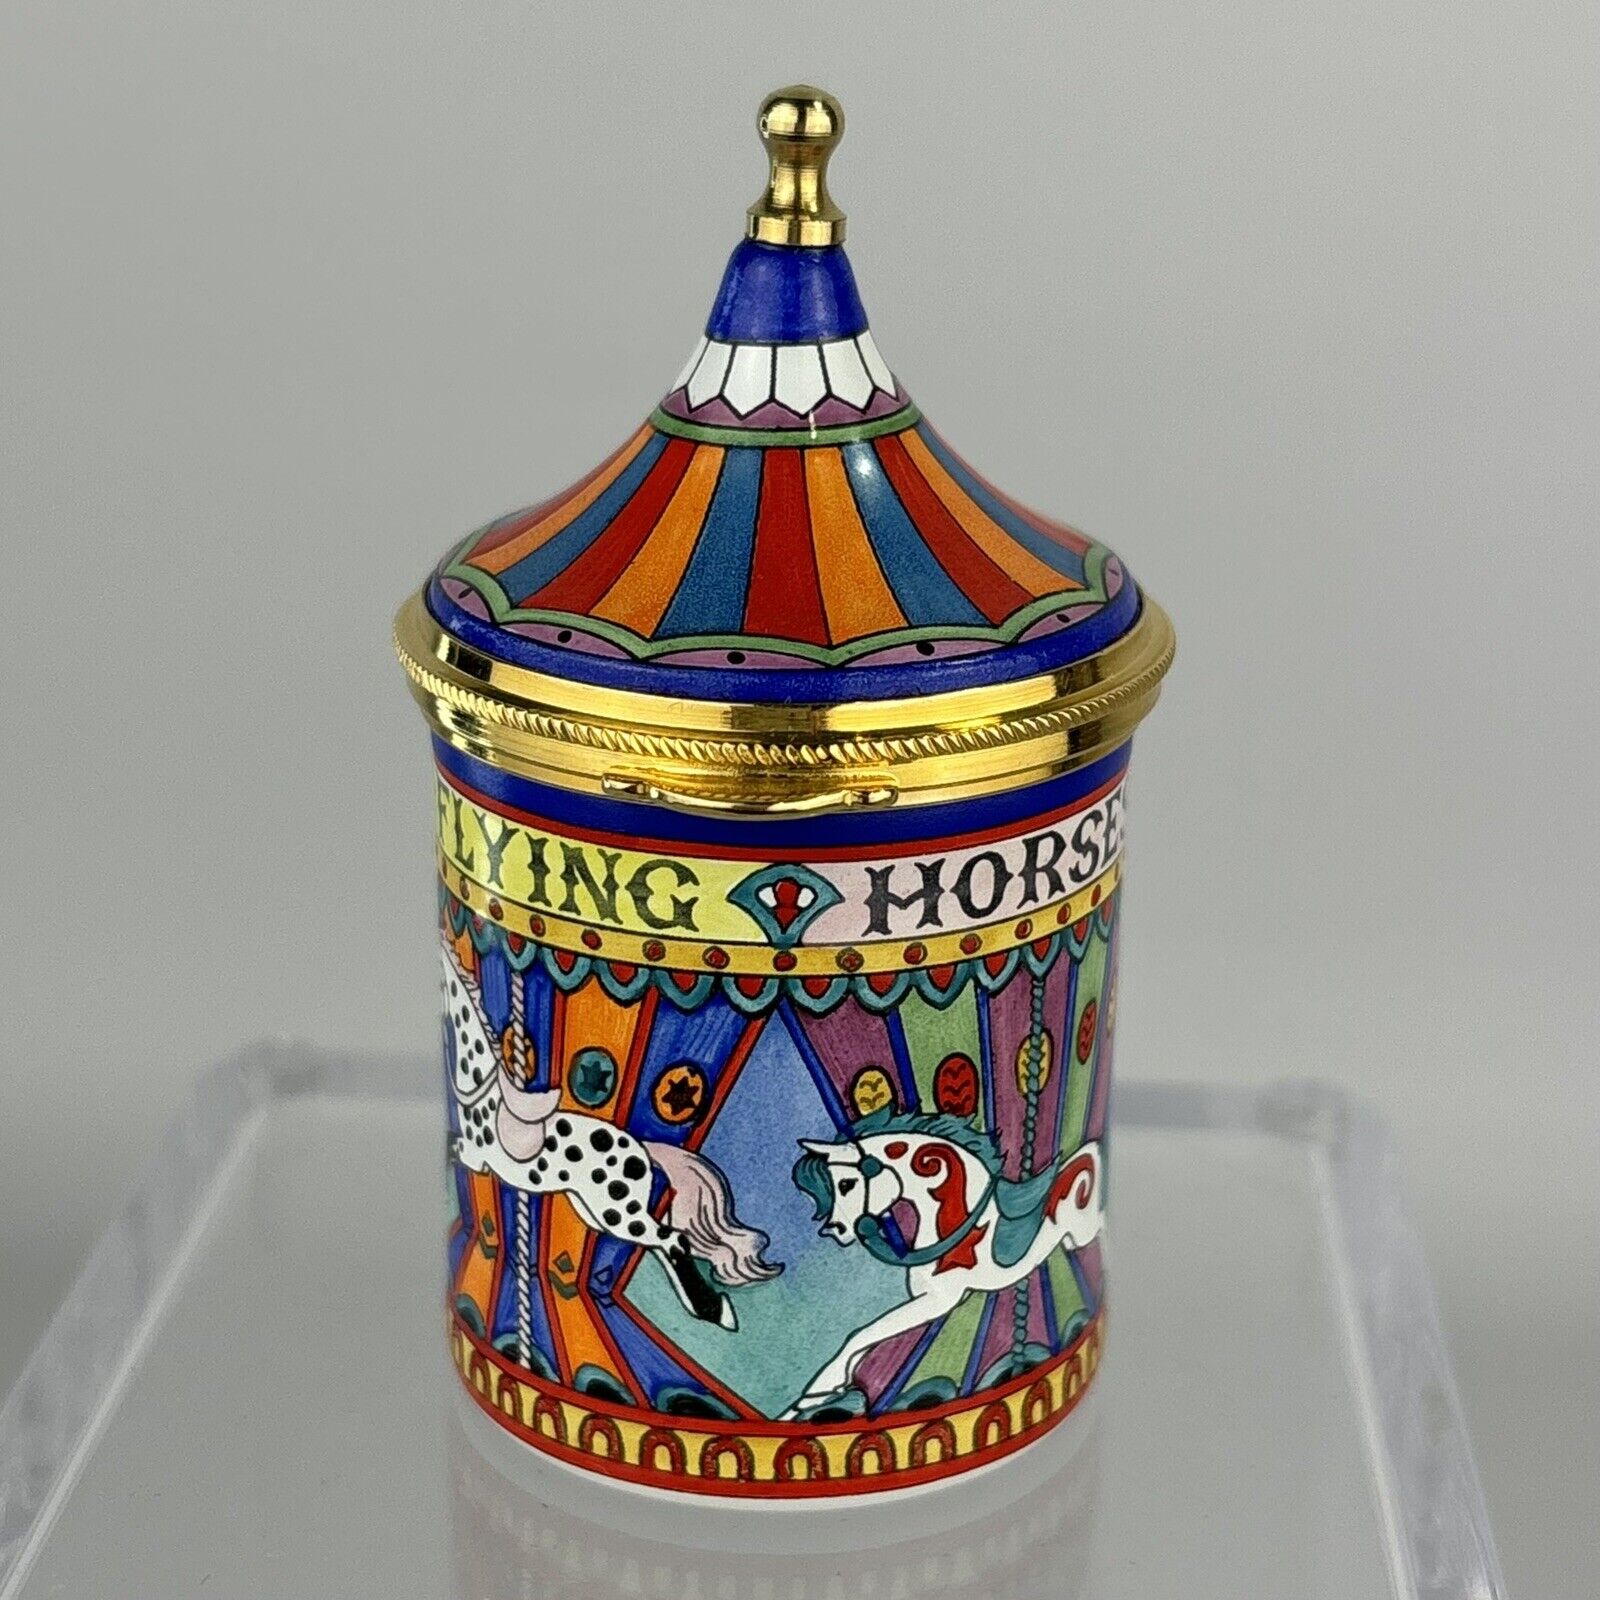 Staffordshire Enamels Circus Tent Flying Horses Trinket Box Hand-painted by M.D.